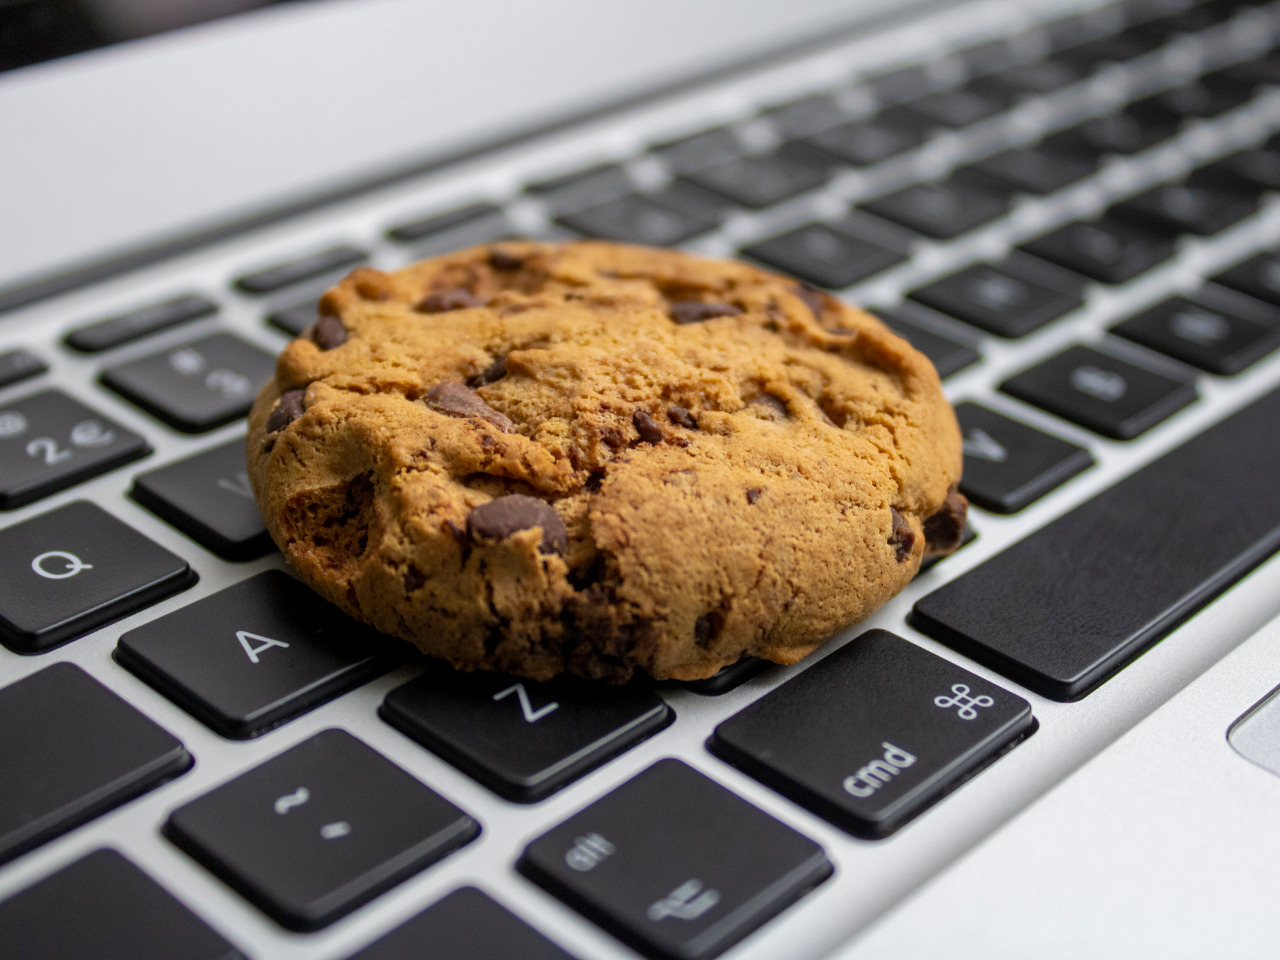 Can cookies steal password?